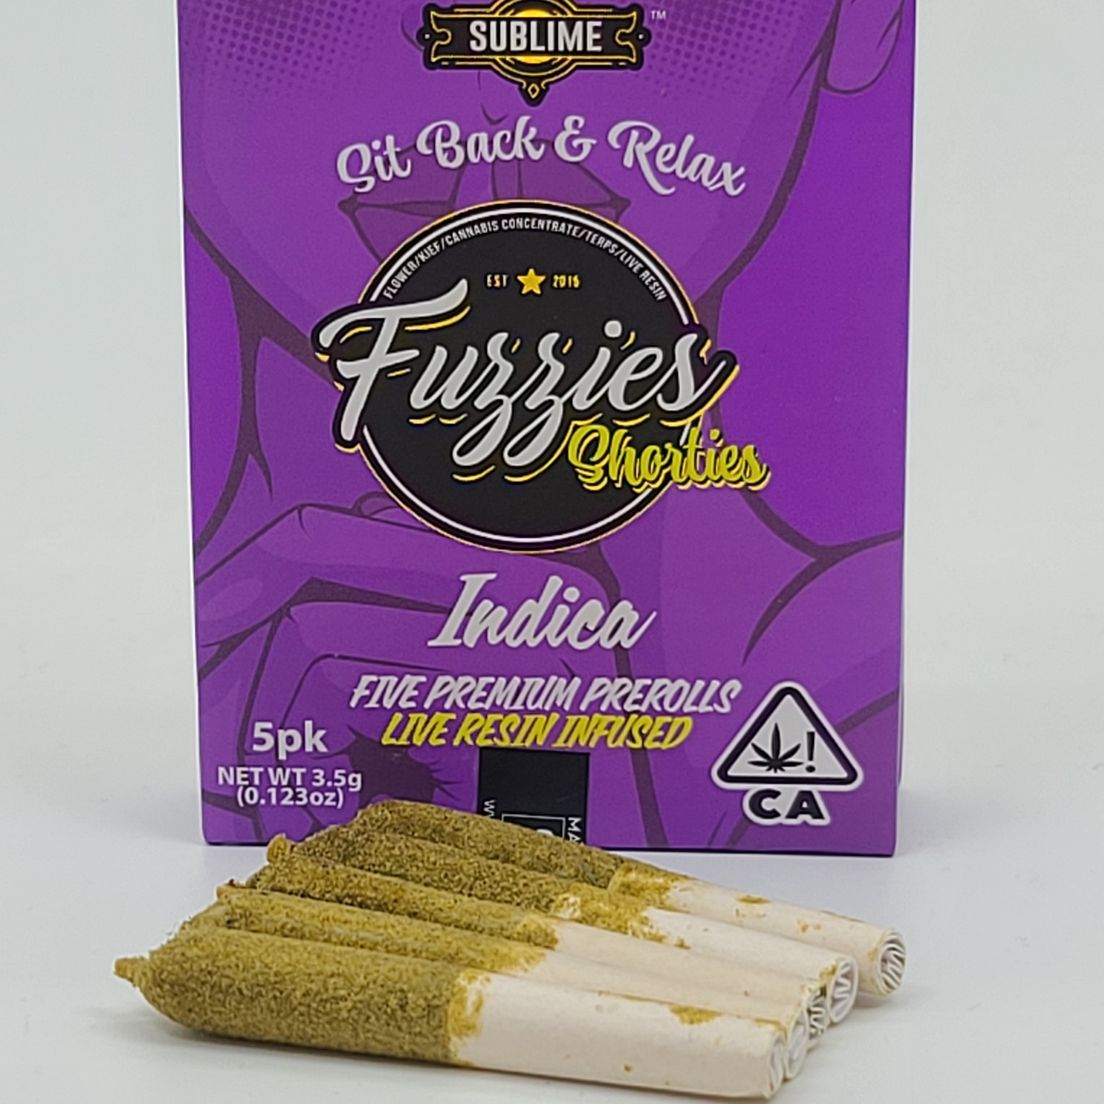 Indica 5pk -3.5g Live Resin Infused Pre-rolls (THC 45%) by Sublime